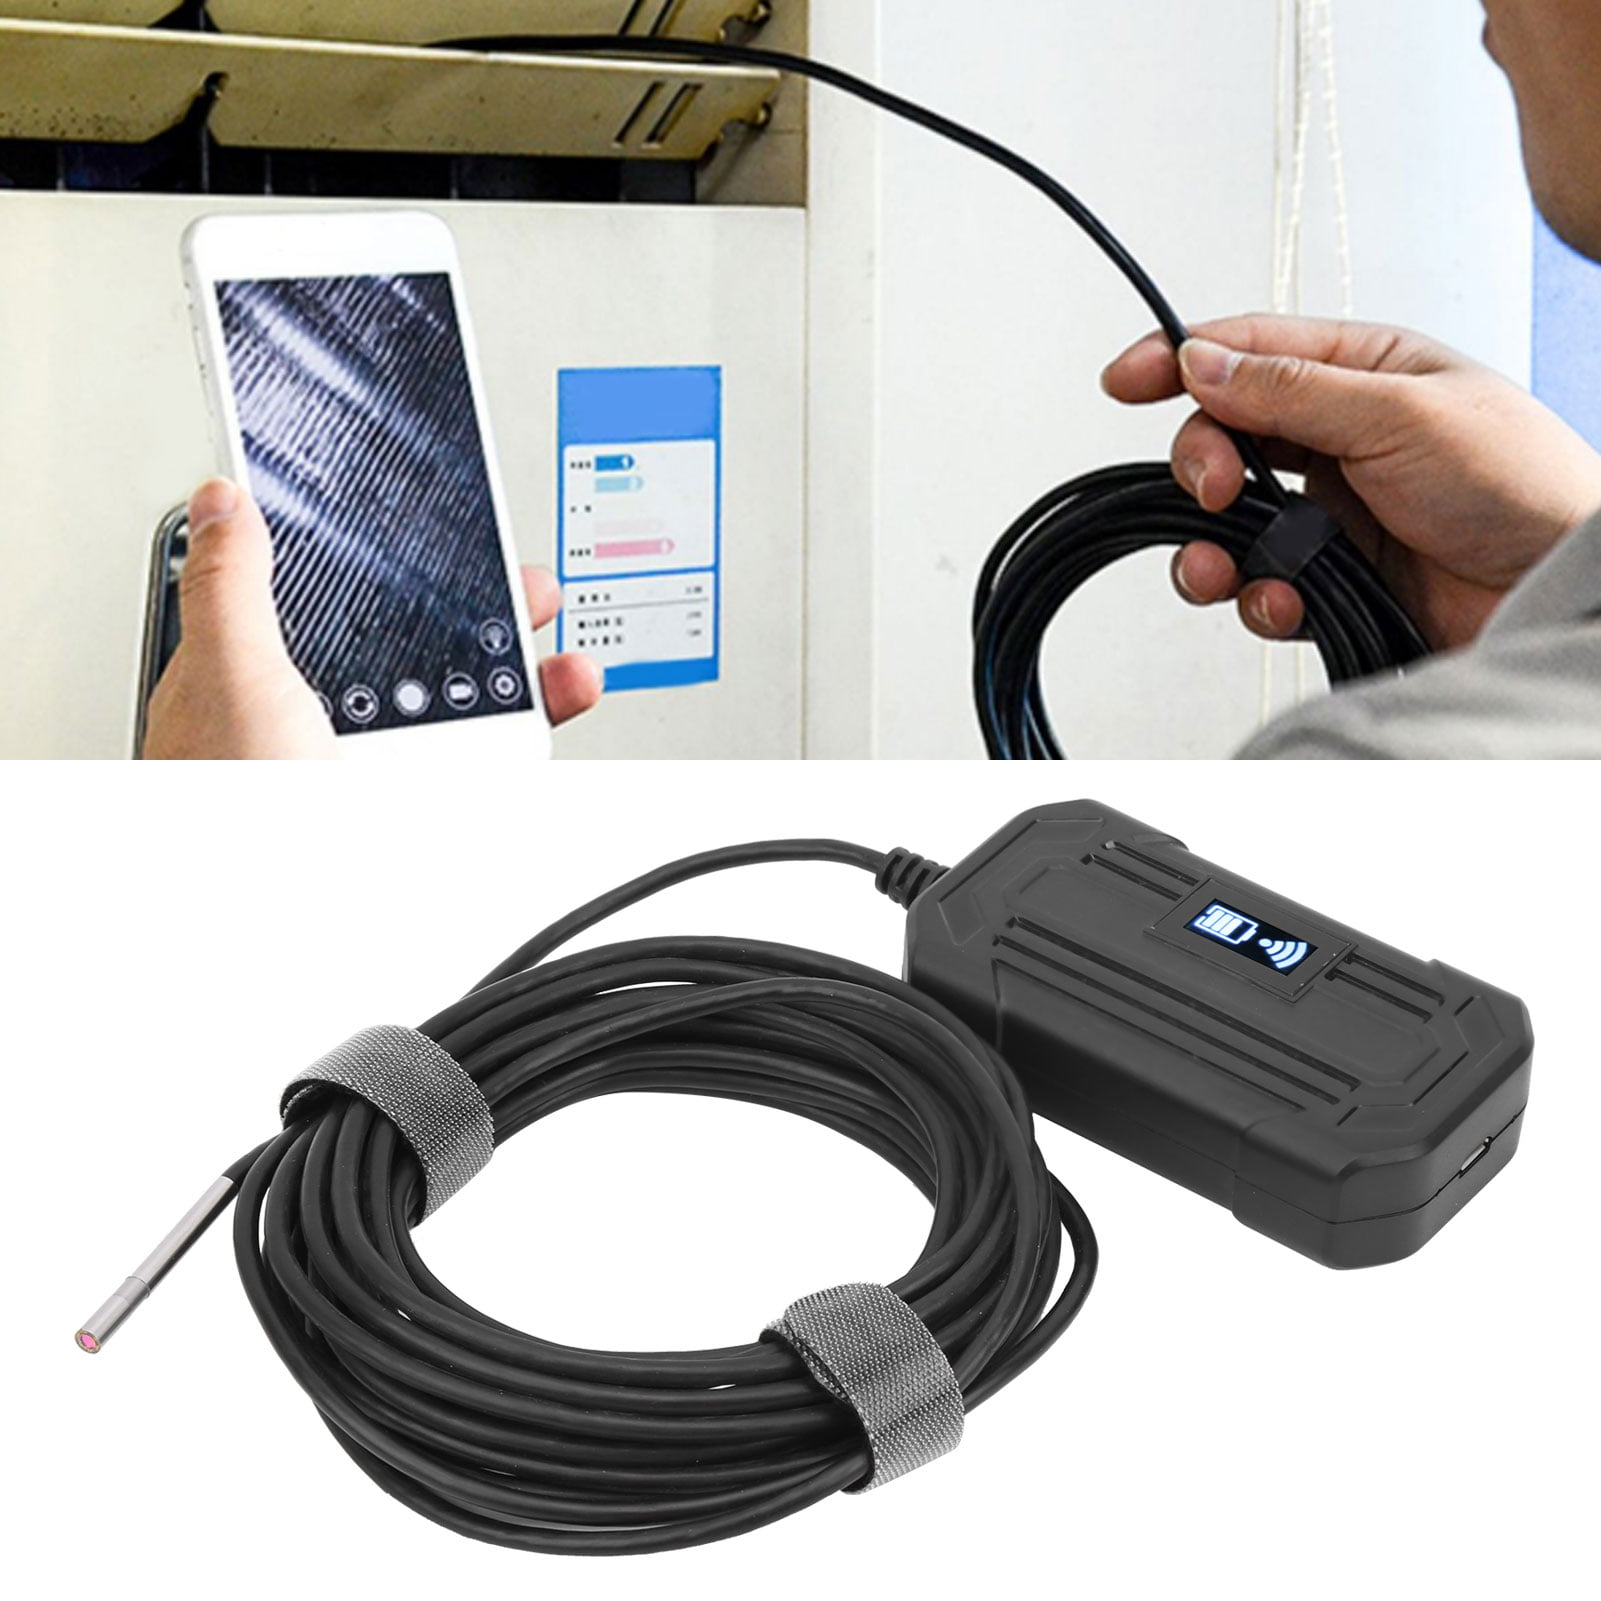 10M Inspection Endoscope Lens IP67 Waterproof F240 3.9mm Wireless Endoscope Camera for Electrical Maintenance,Drainage Pipelines Machinery Car Engine Maintenance 